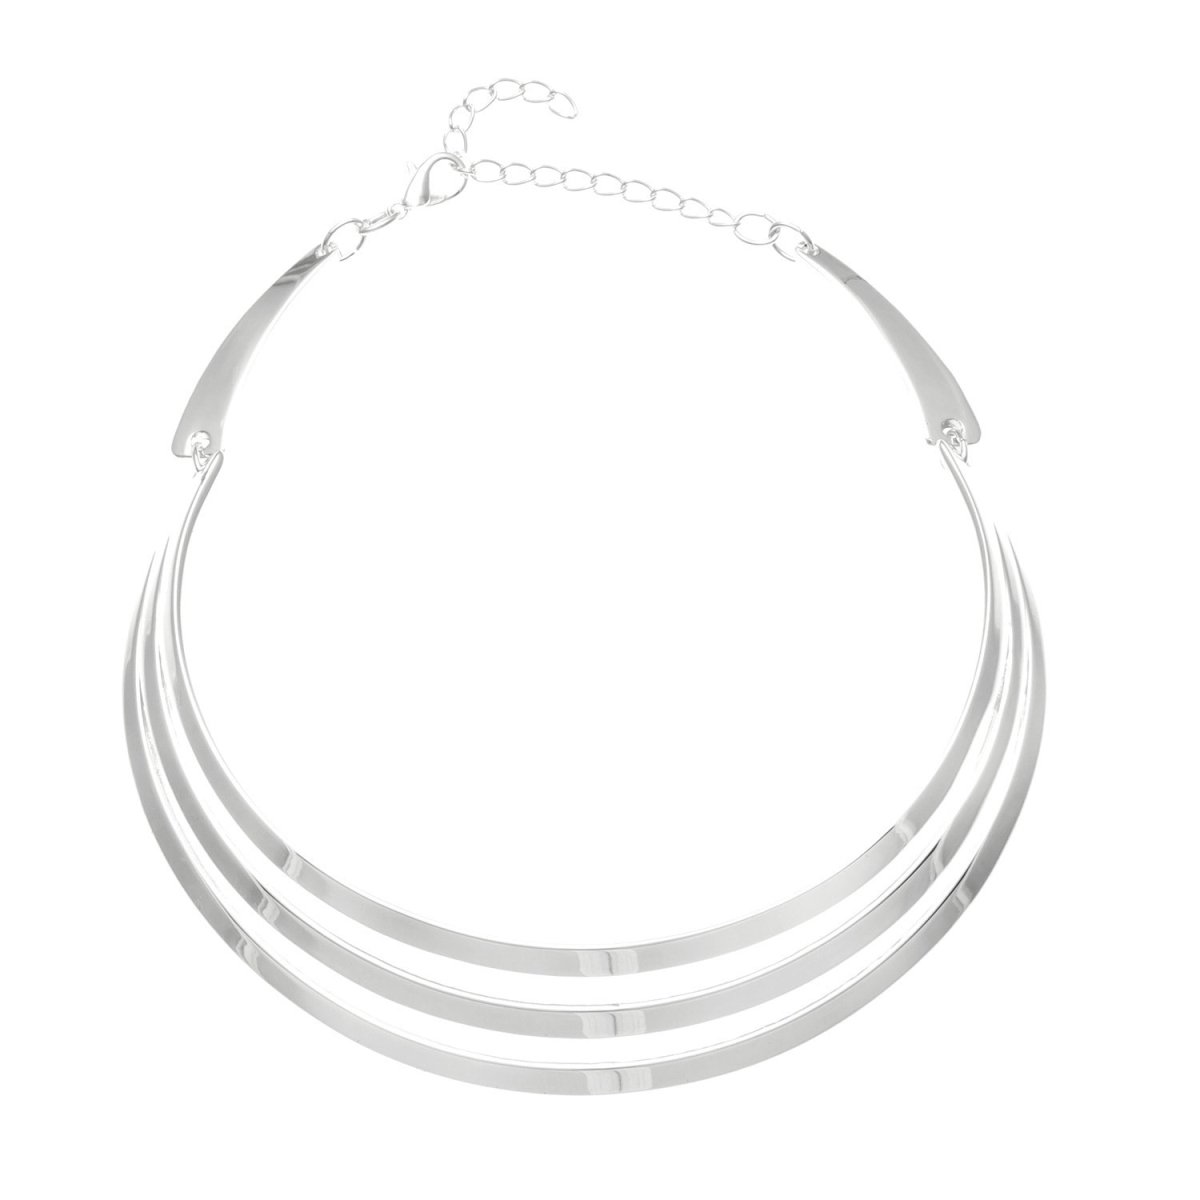 Picture of J&H Designs 5290/N/Silver Three-row Choker Necklace